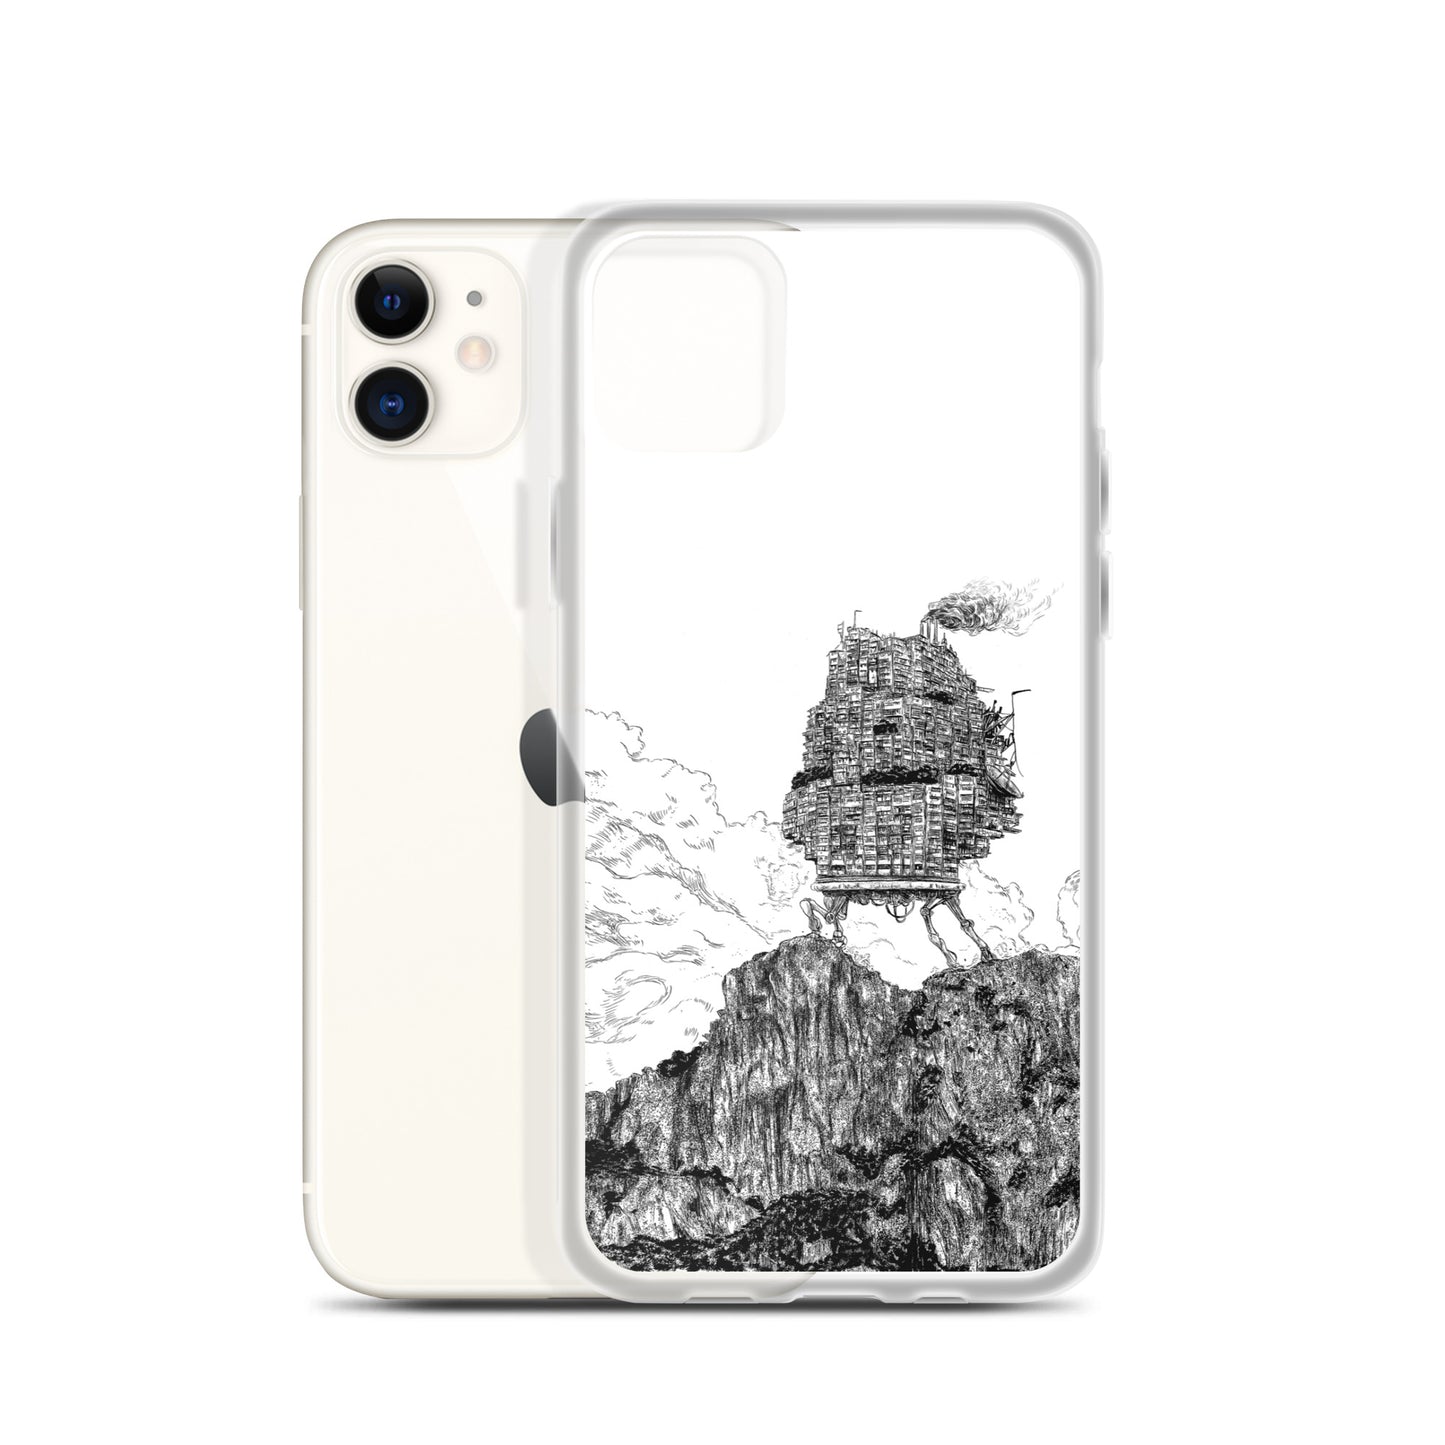 Moving Walled City 2 移動城寨 2 iPhone Case